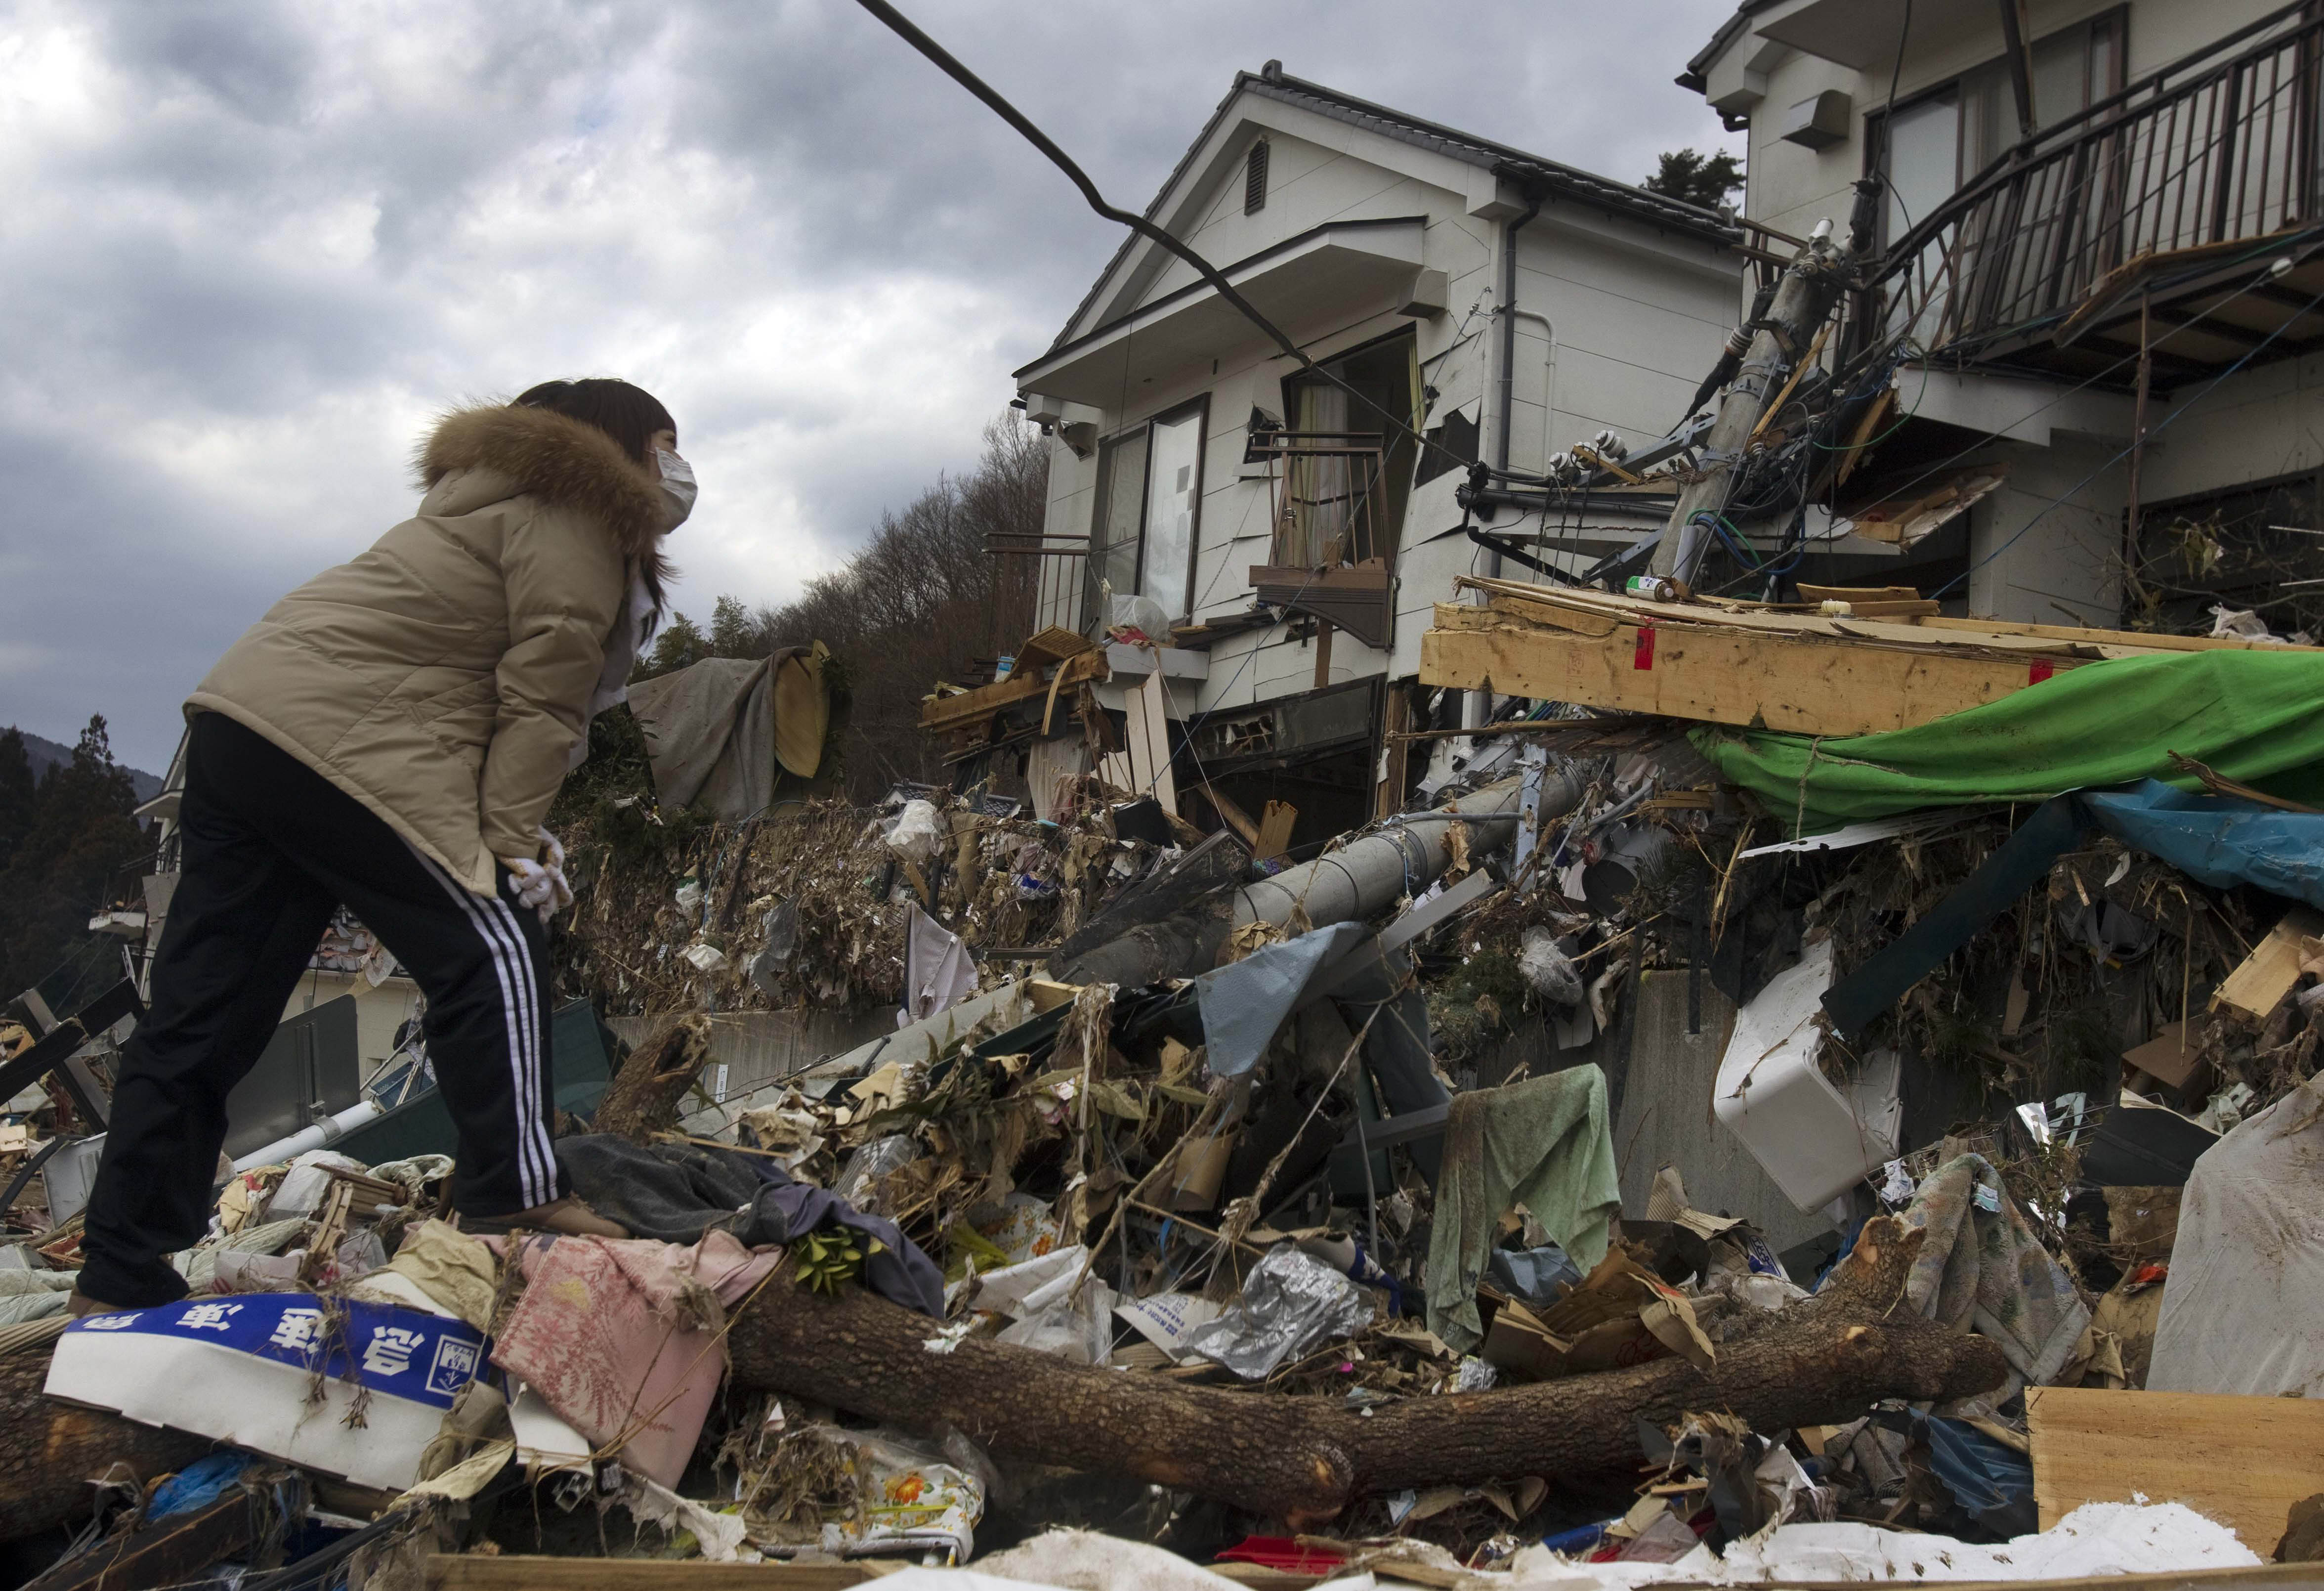 Tayo Kitamura, 40, stands on the rubble of the home of her mother, Kuniko Kitamura, 69, as Japanese fireman discover her mother's body in Onagawa, northeastern Japan Saturday, March 19, 2011. (AP Photo/David Guttenfelder)